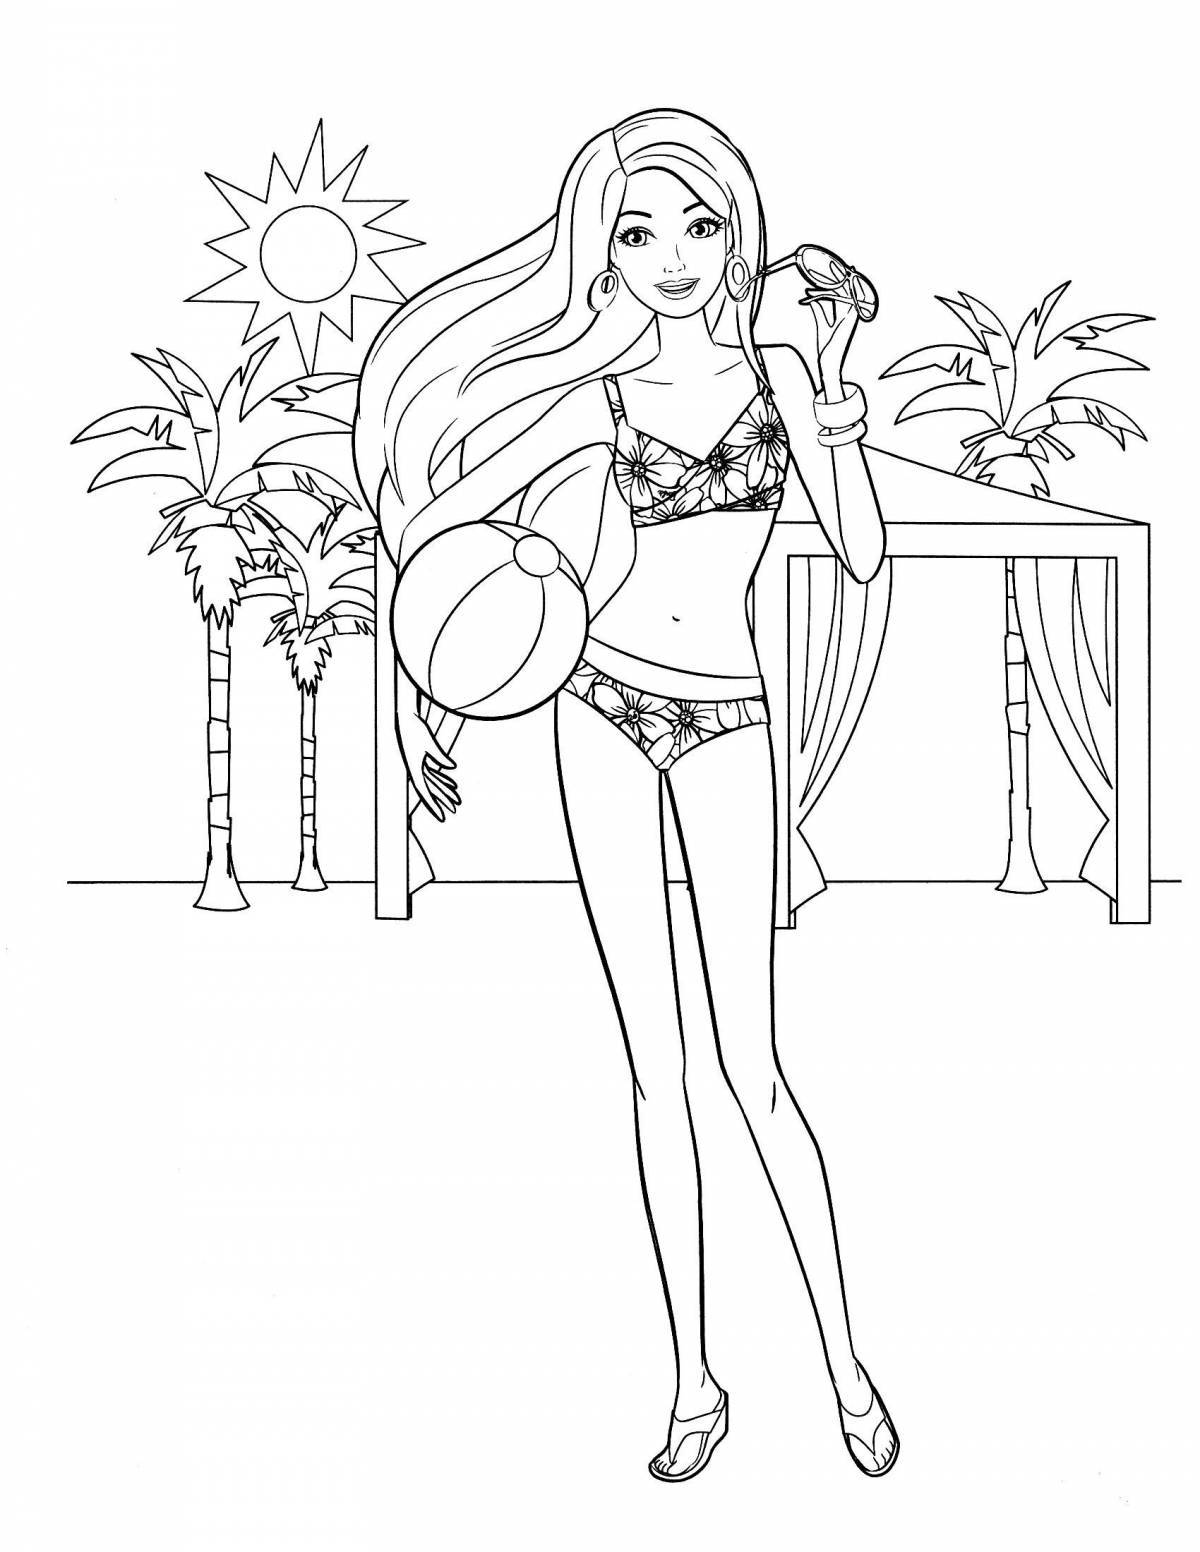 Coloring book shining barbie doll